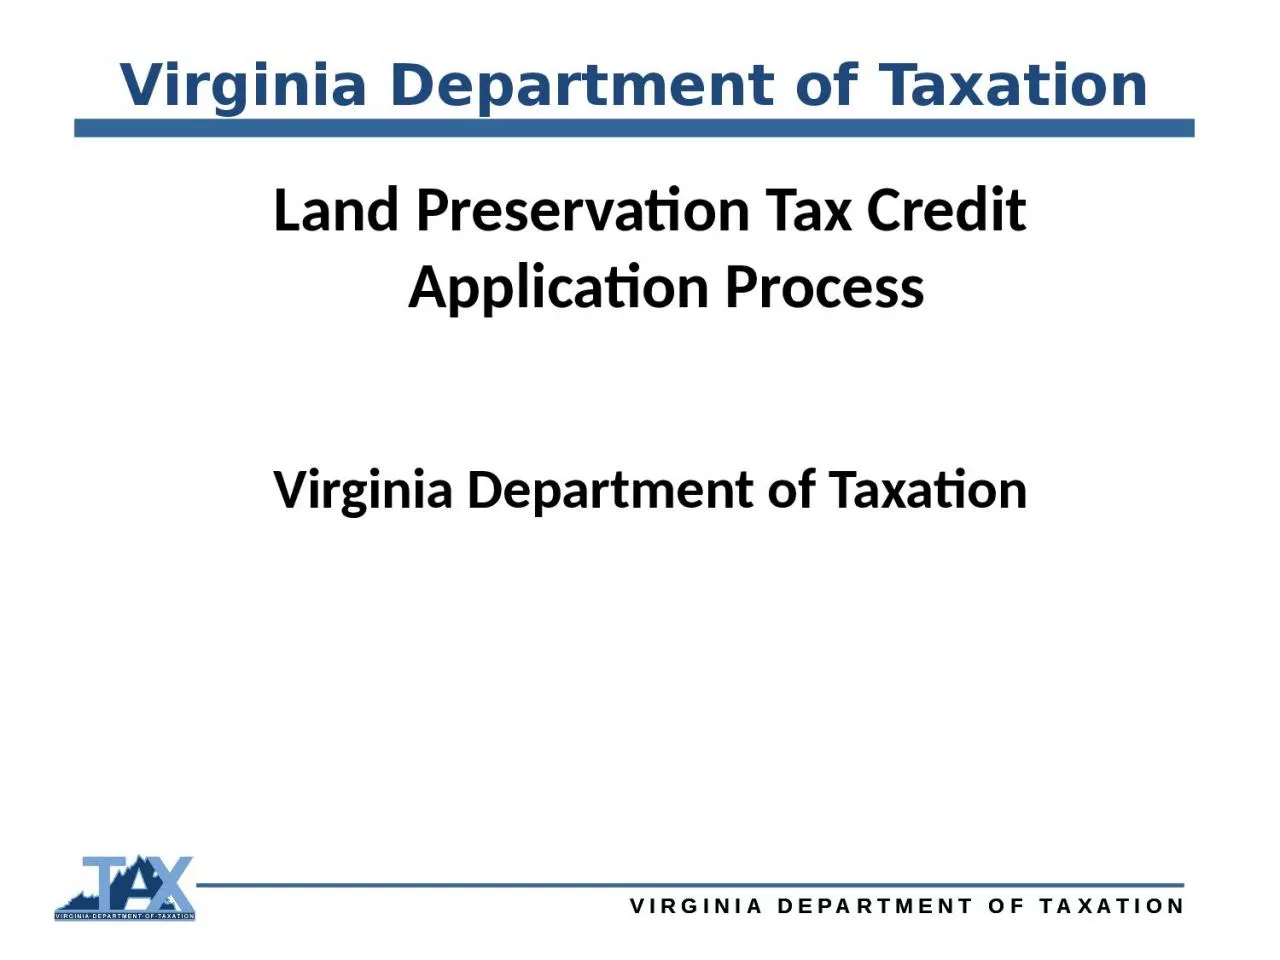 Virginia Department of Taxation